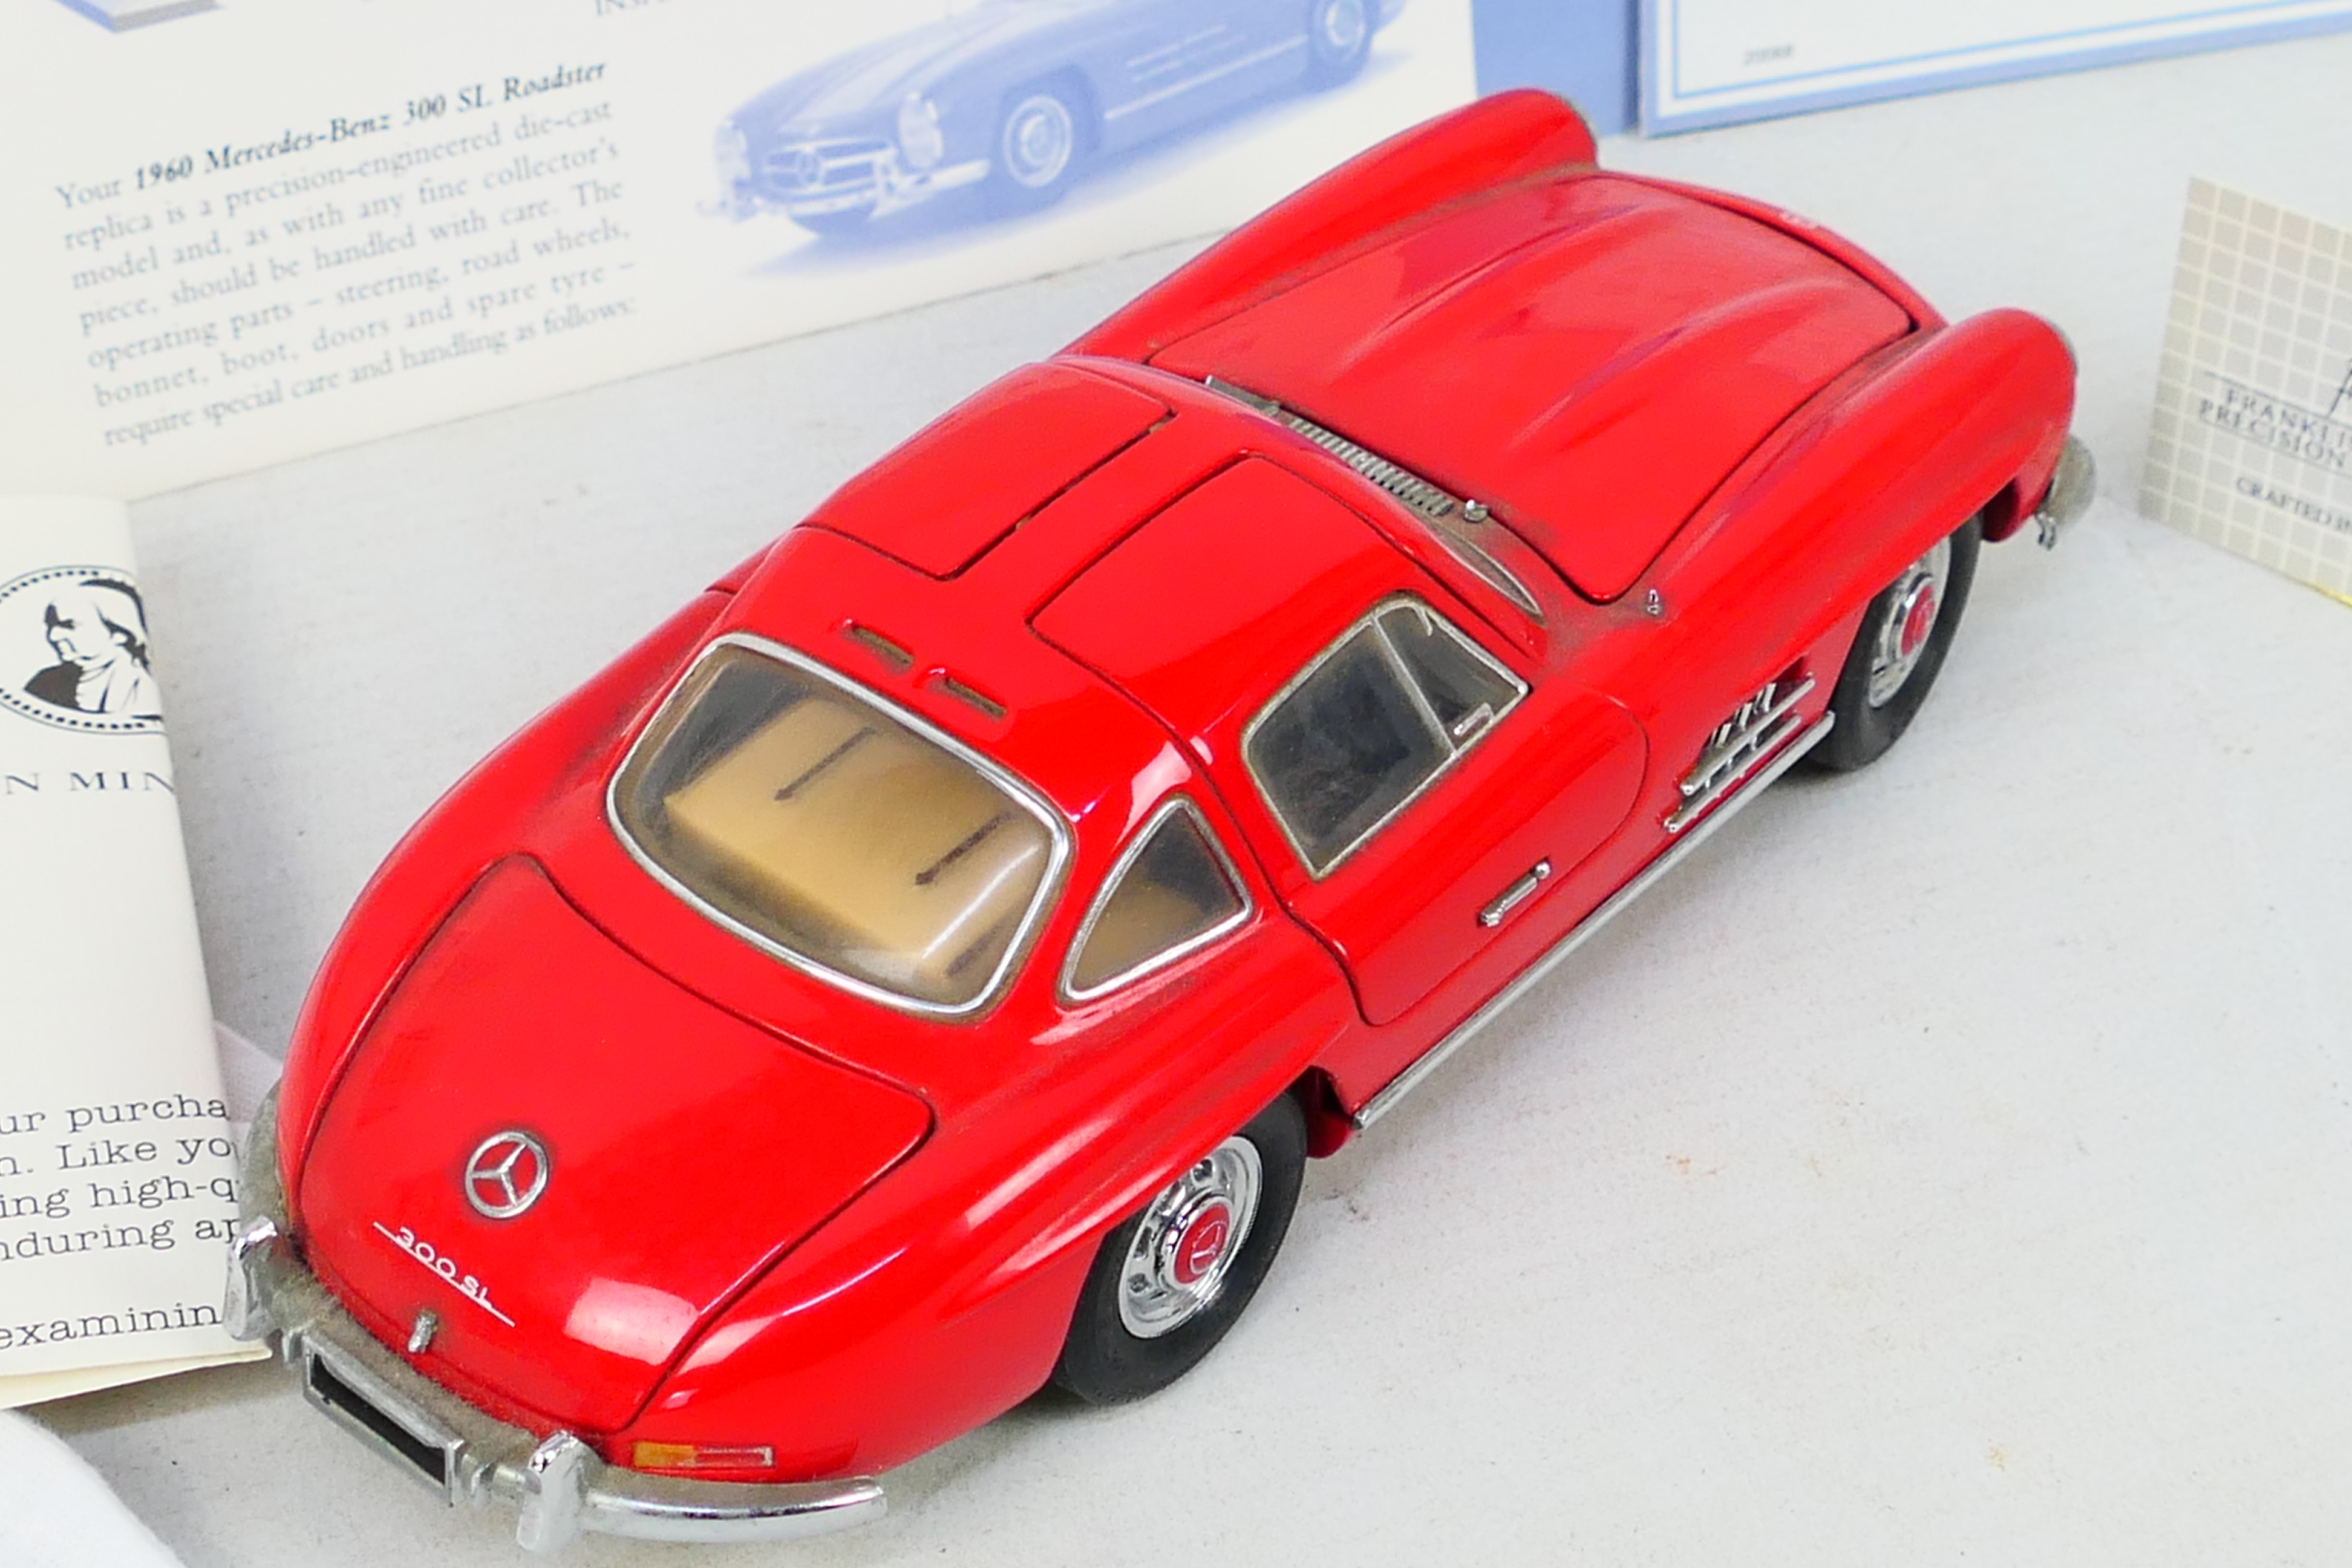 Franklin Mint - A boxed 1:24 scale Franklin Mint 1960 Mercedes Benz Gullwing diecast model car. - Image 3 of 3